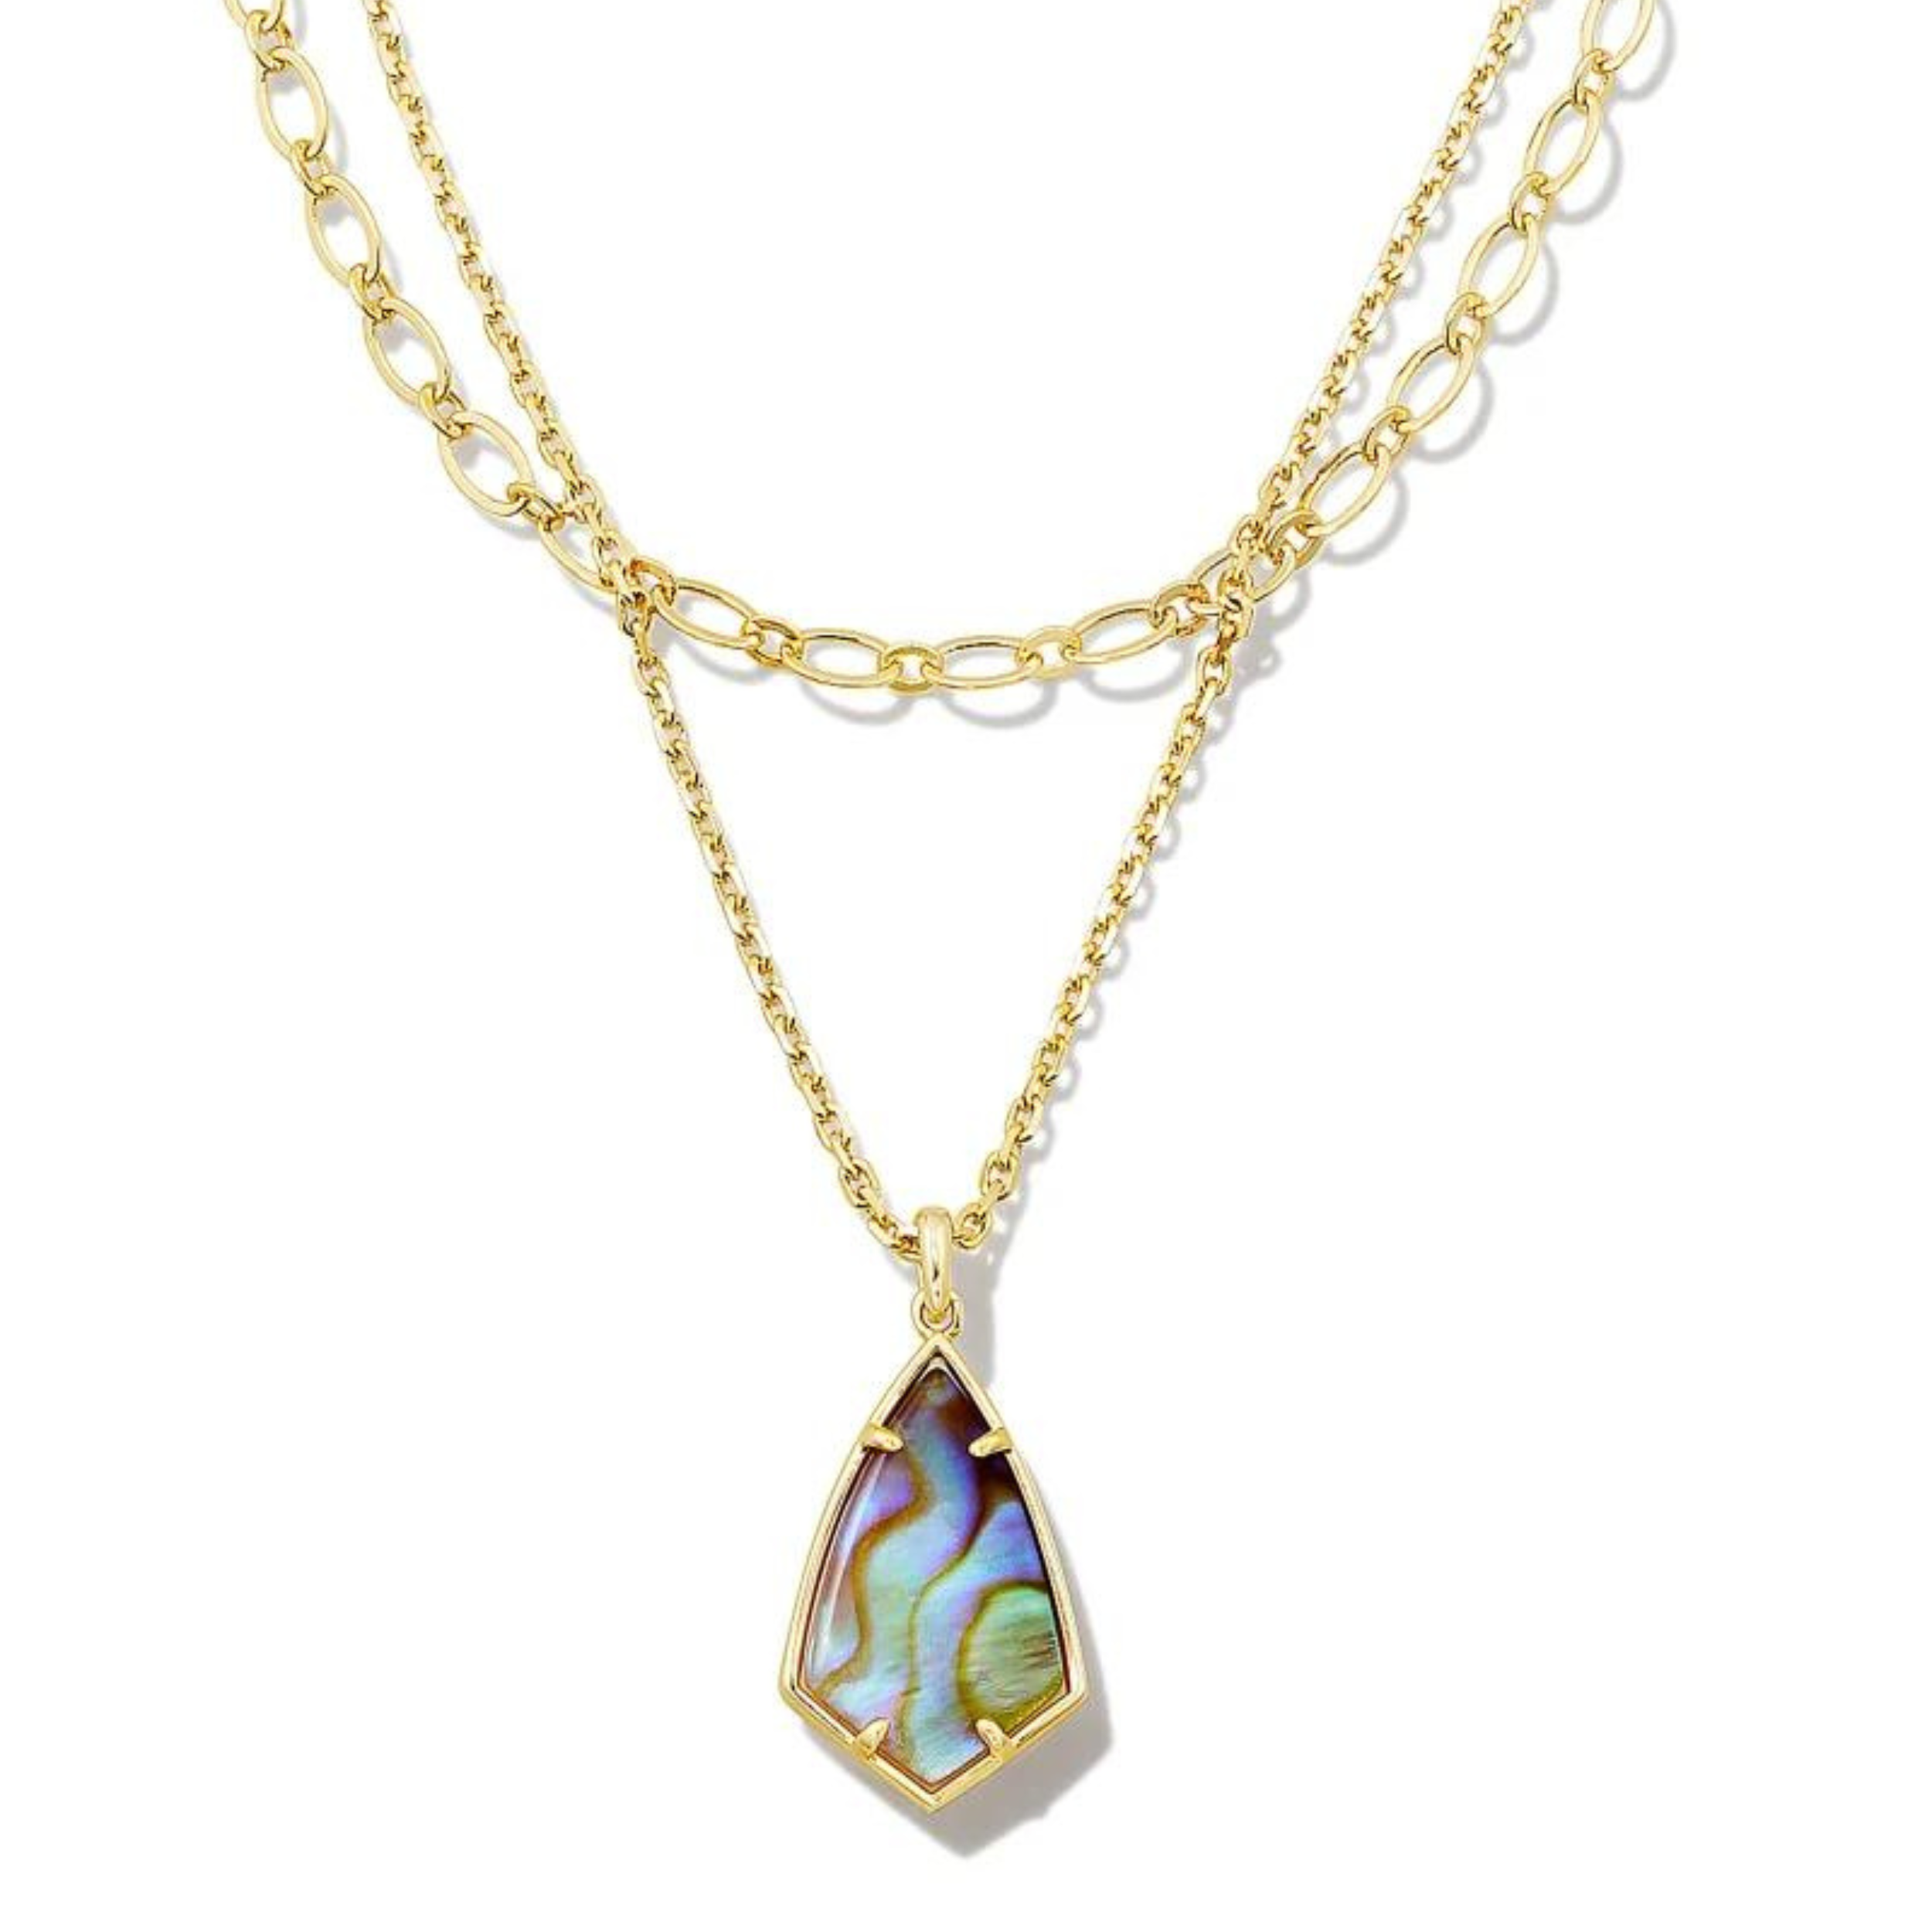 Gold multi strand necklace with a iridescent abalone pendant, pictured on a white background.